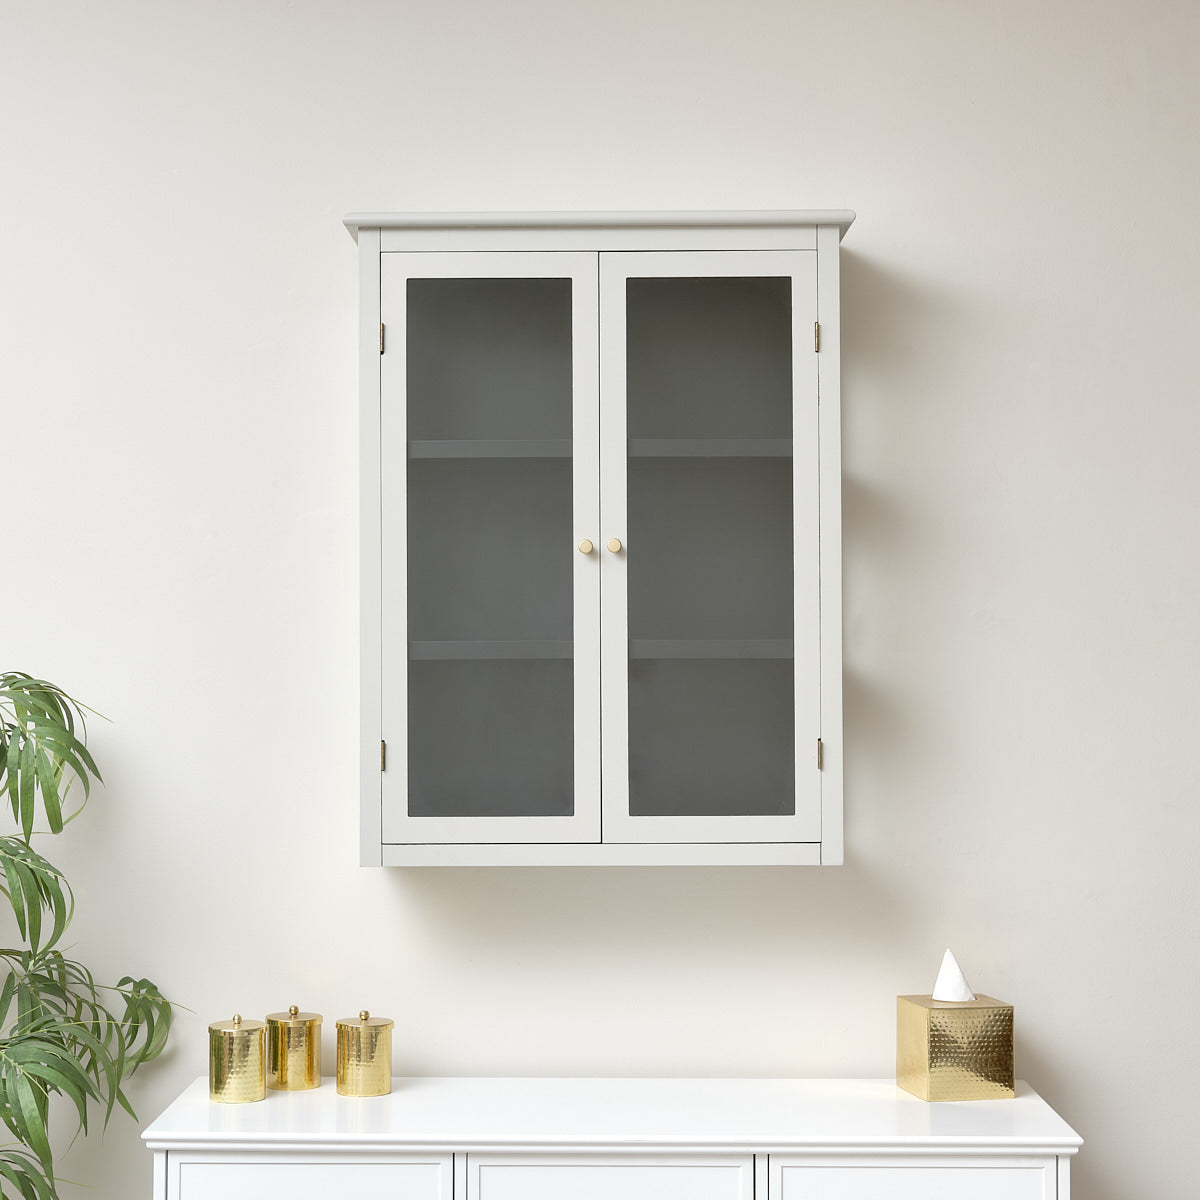 Large Grey & Black Glass Fronted Wall Cabinet 90cm x 70cm